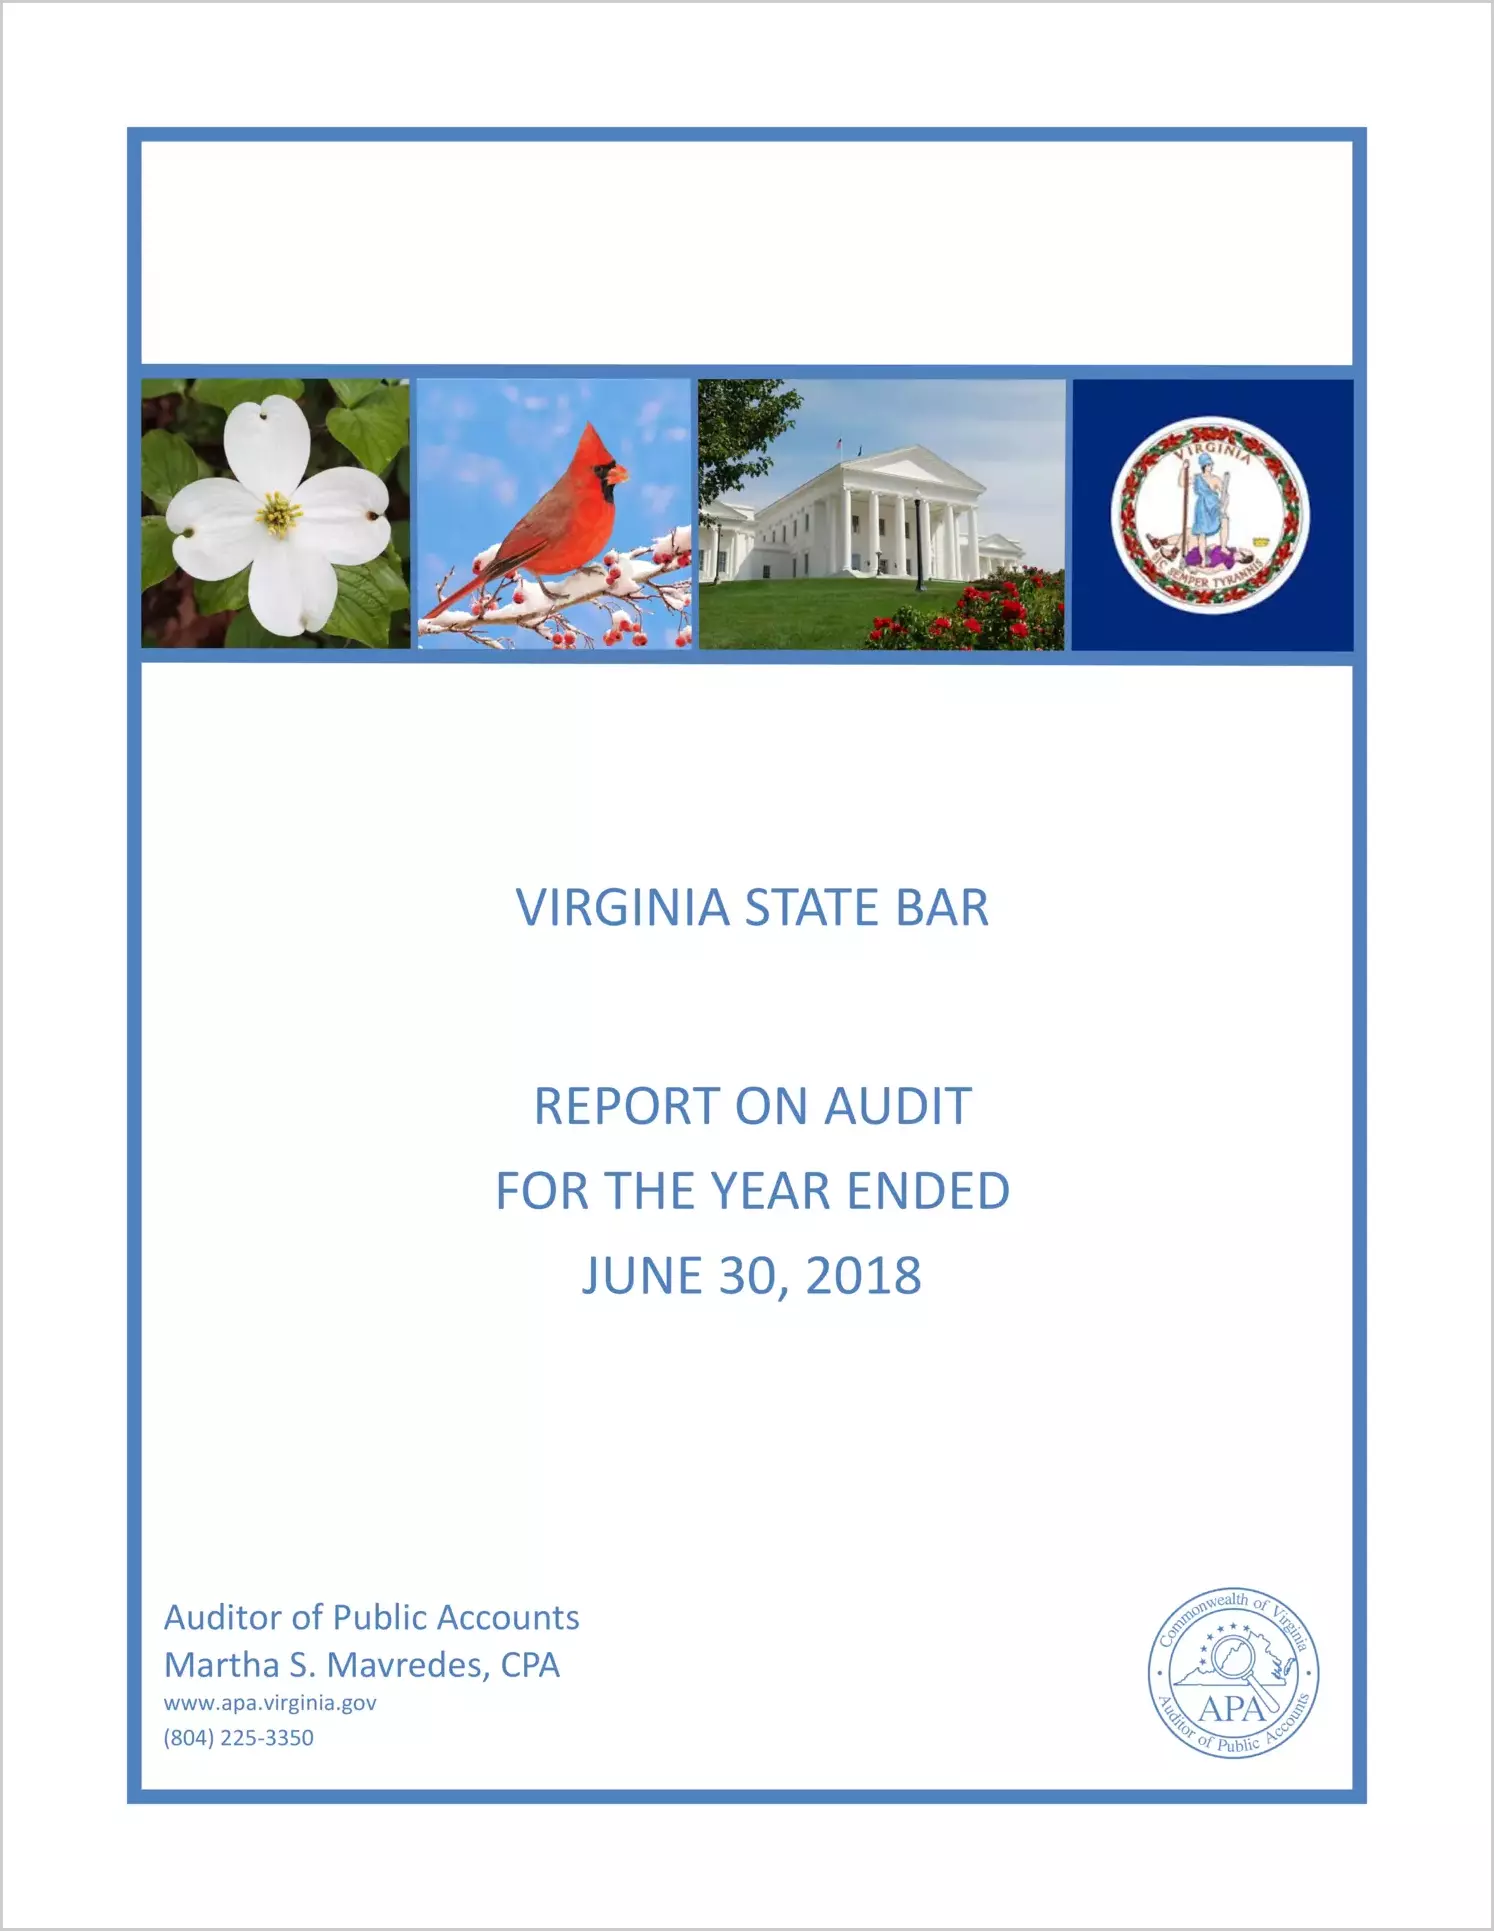 Virginia State Bar for the year ended June 30, 2018